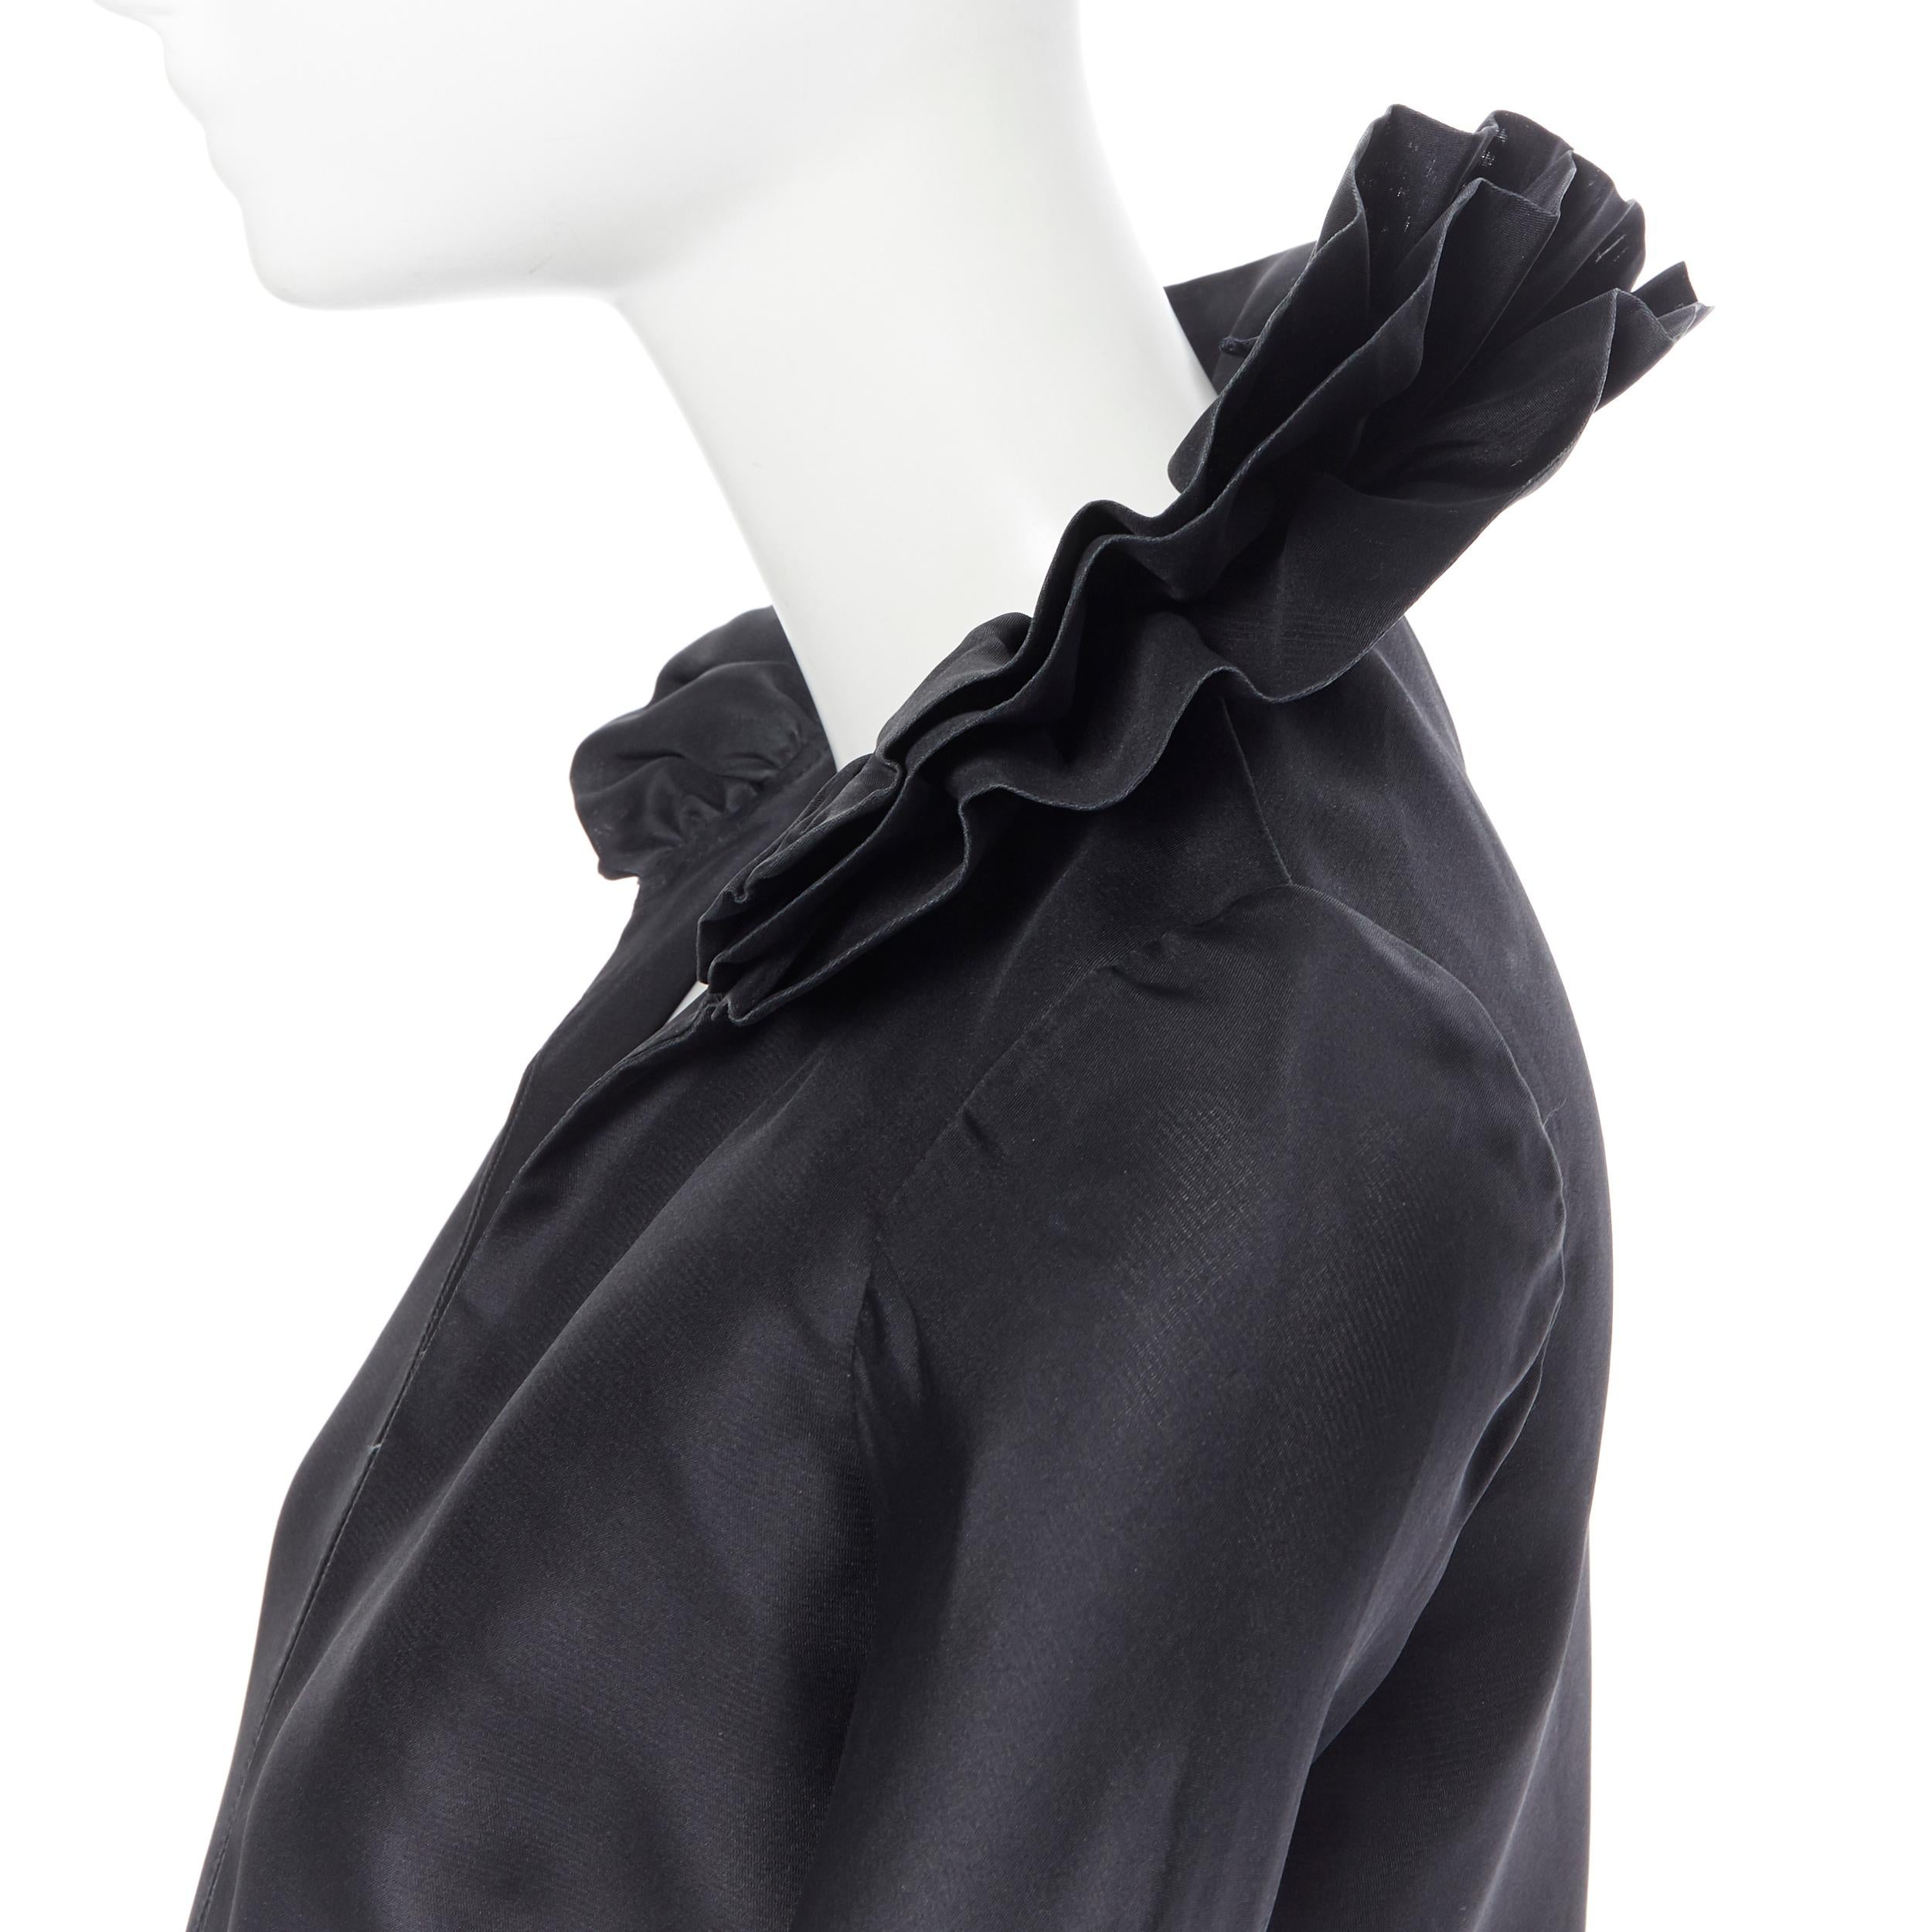 GUCCI TOM FORD AW00 Vintage 100% silk black Victorian plunge neck ruffle dress M
Brand: Gucci
Designer: Tom Ford
Collection: Fall Winter 2000 Runway
Model Name / Style: Silk dress
Material: Silk
Color: Black
Pattern: Solid
Closure: Zip
Extra Detail: